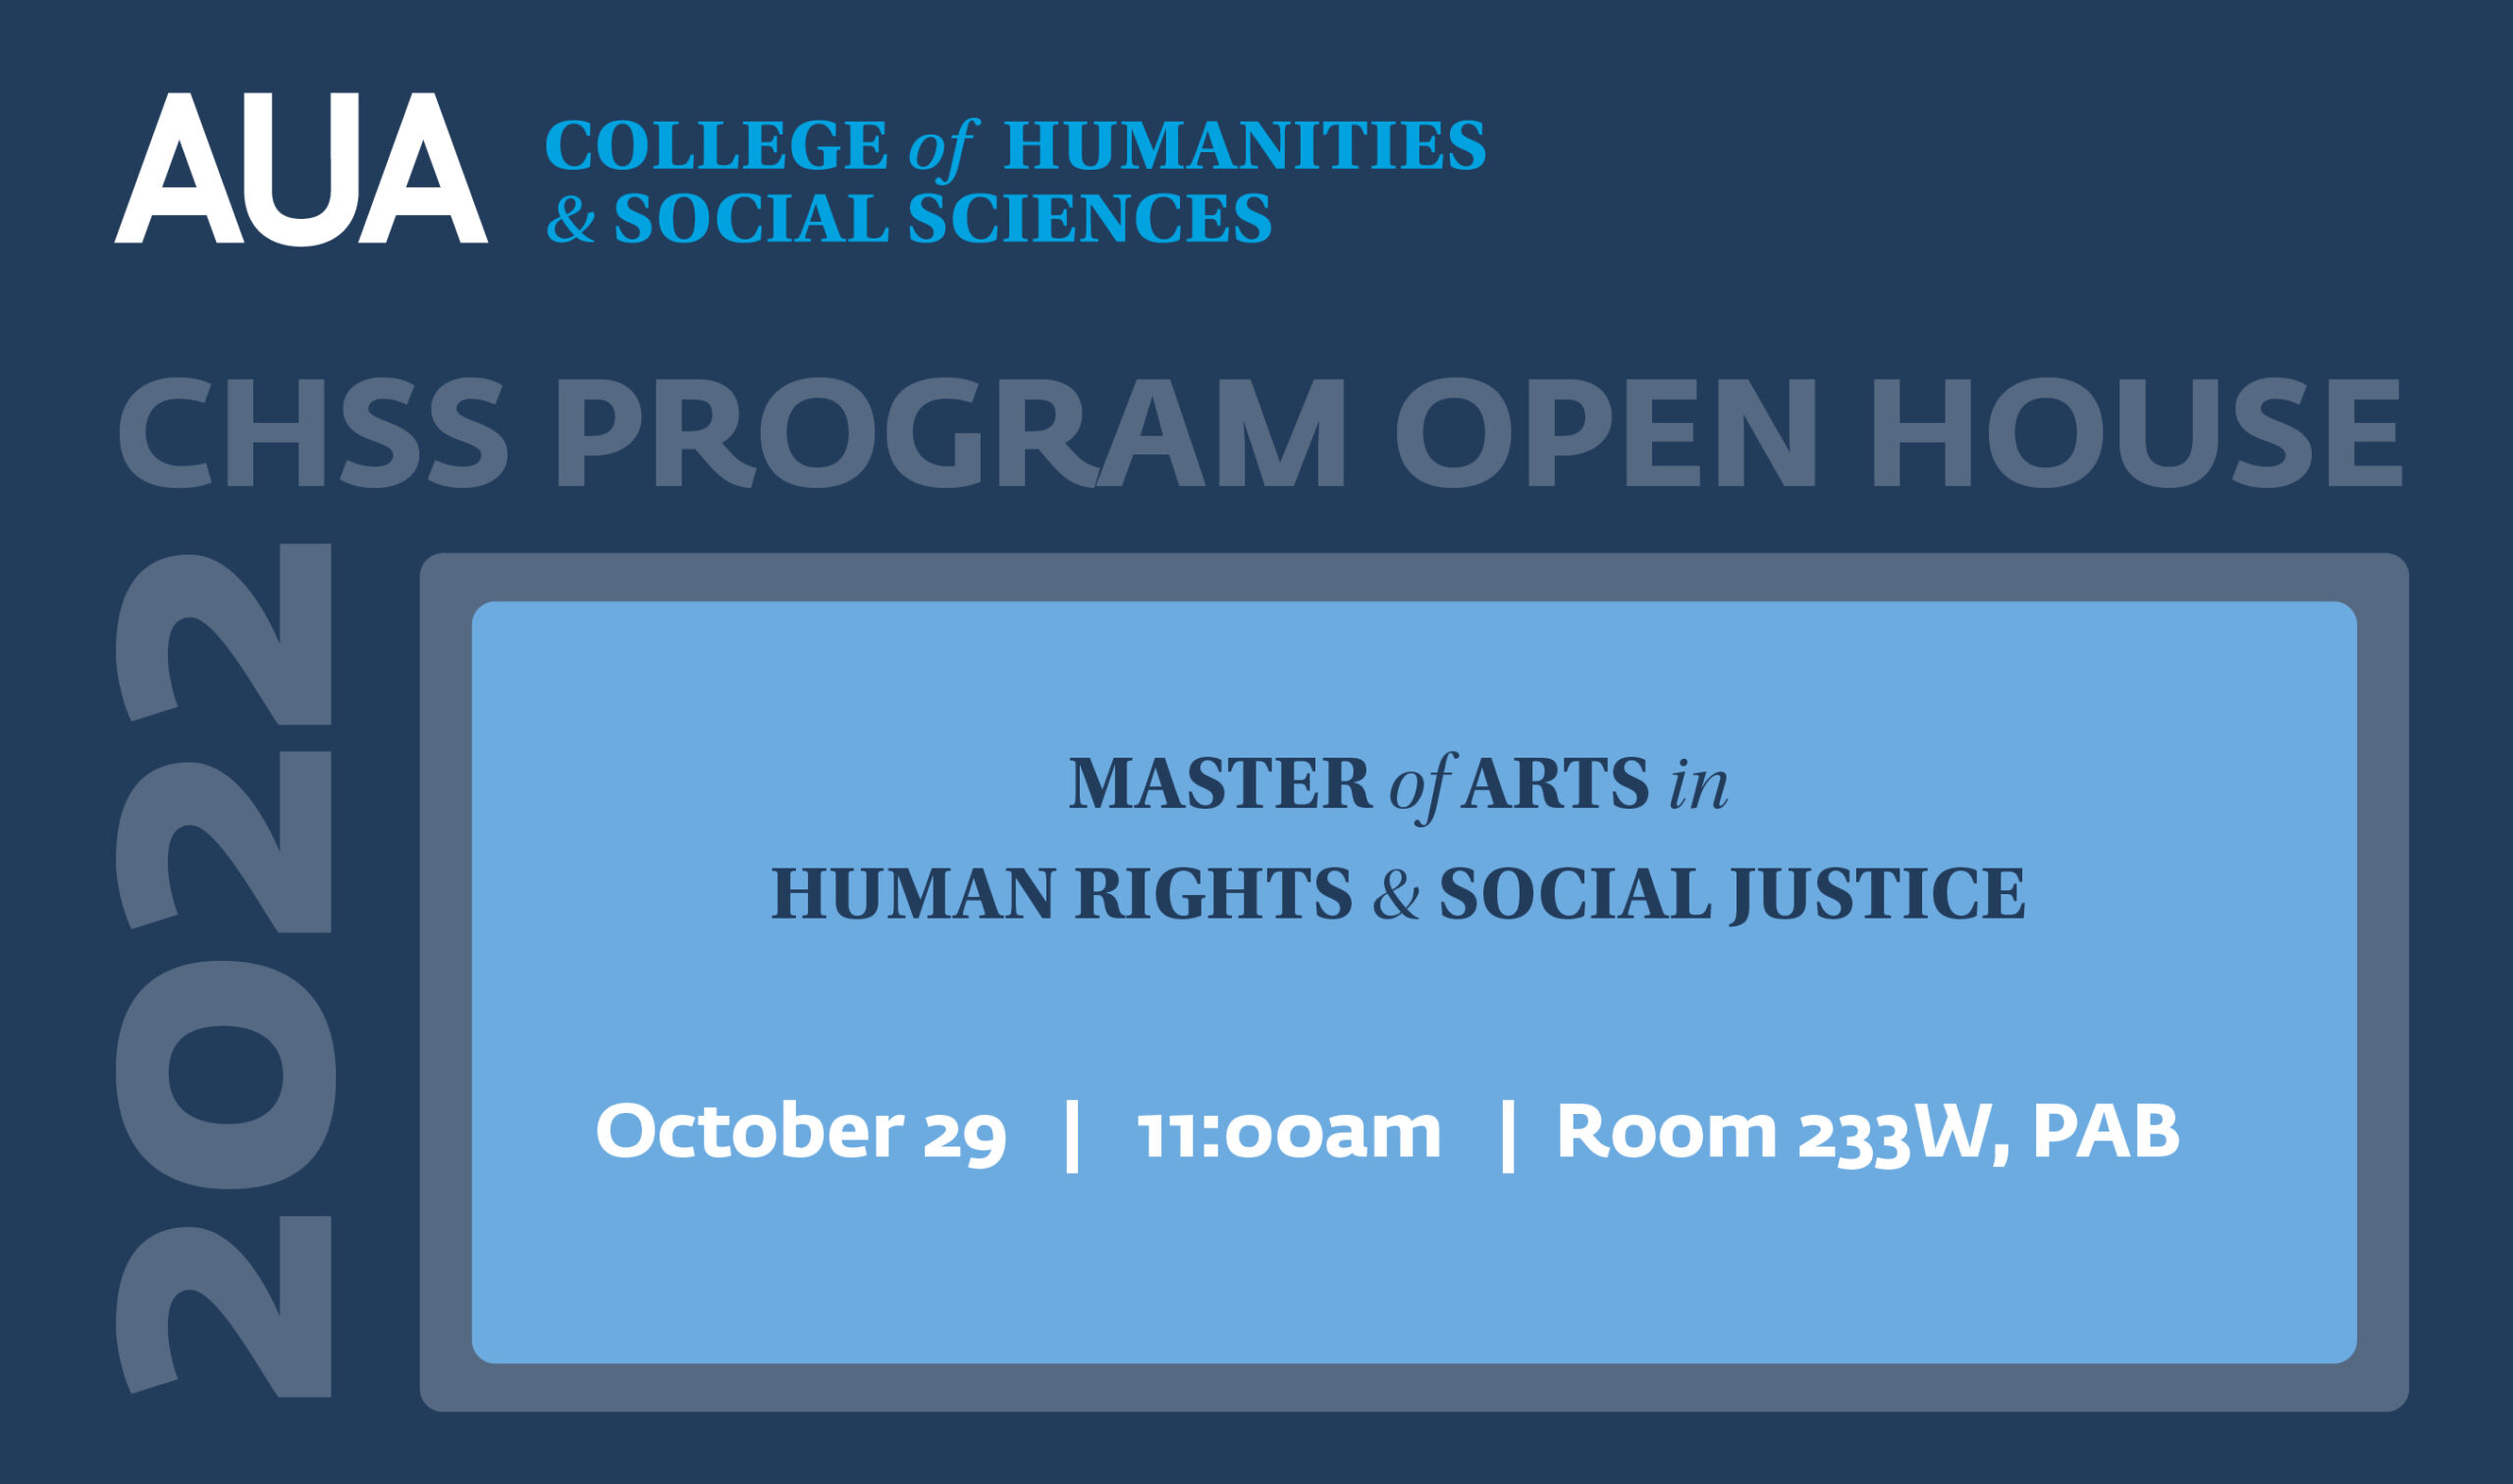 MA Human Rights and Social Justice Program Open House Event